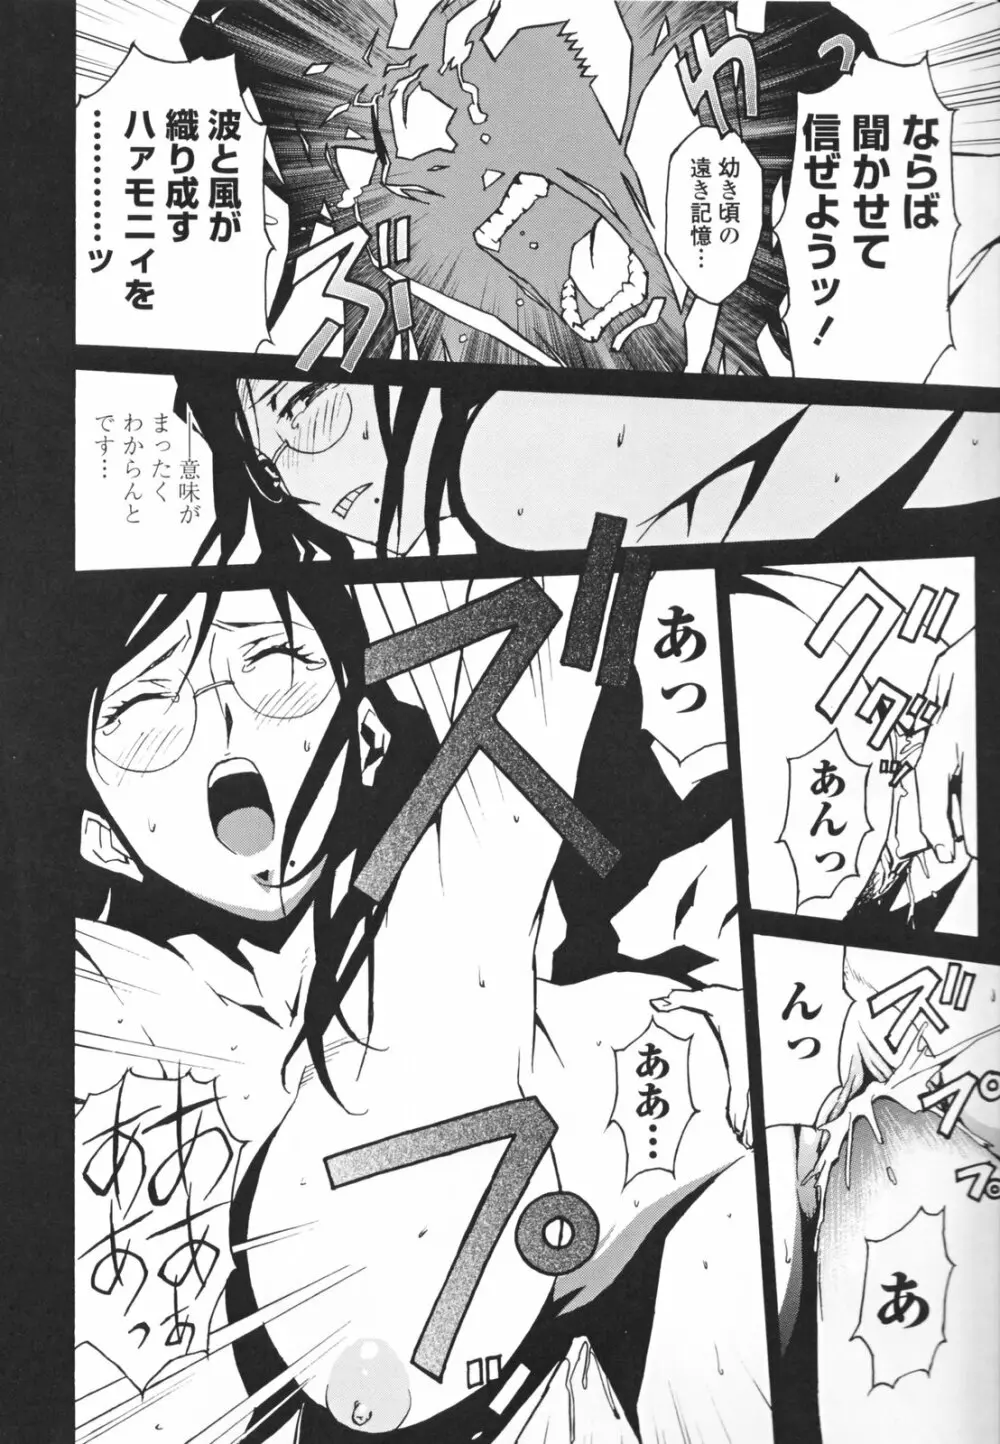 TOP LESS 淫女之宴 Page.158